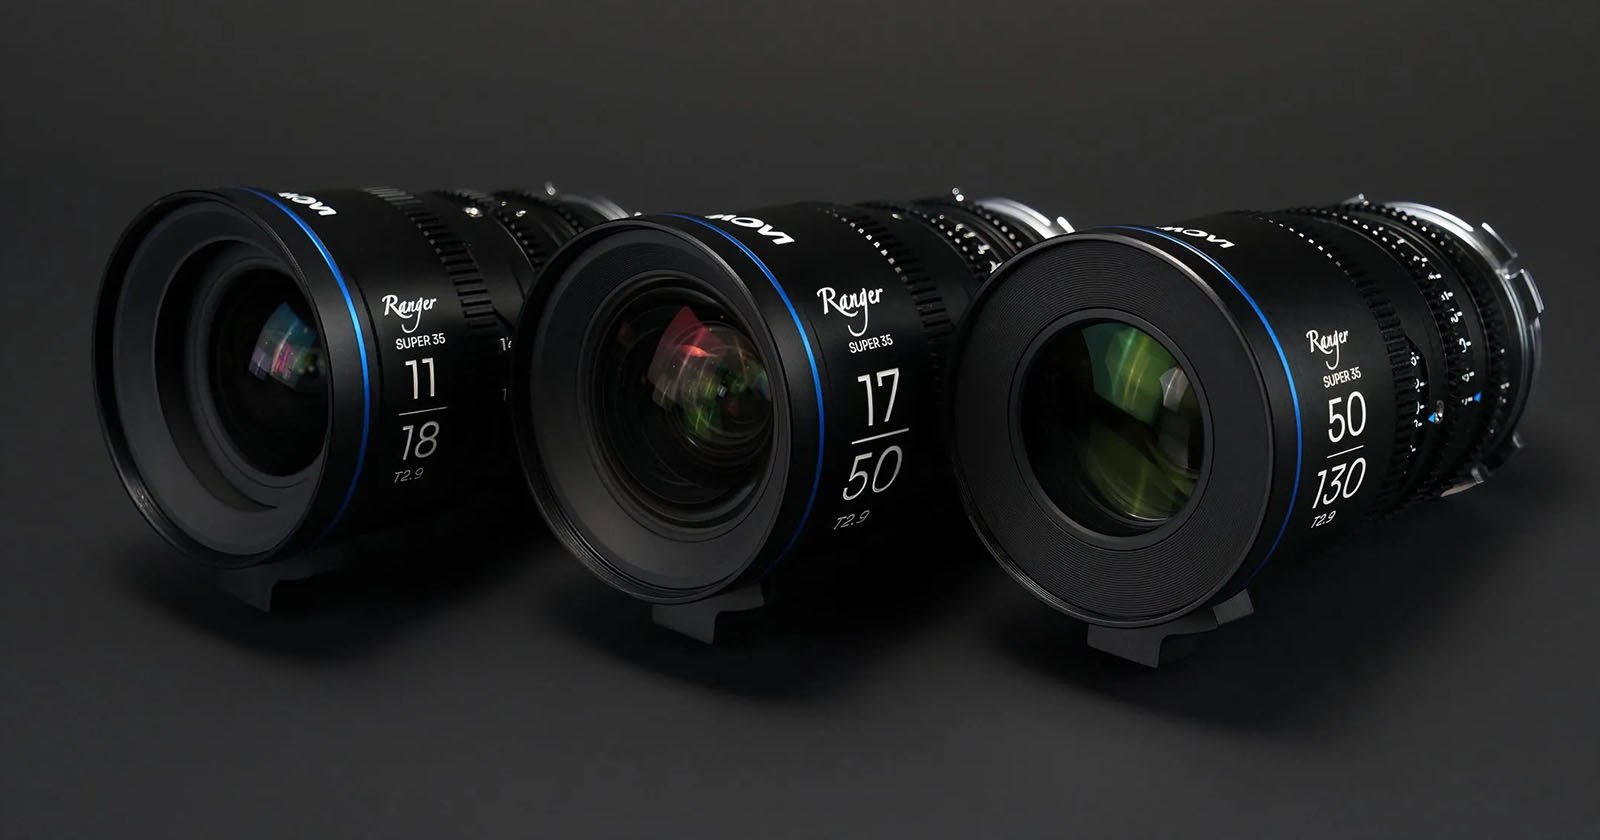 Laowas New Ranger S35 Lenses Are Compact and Lightweight Cine Zooms